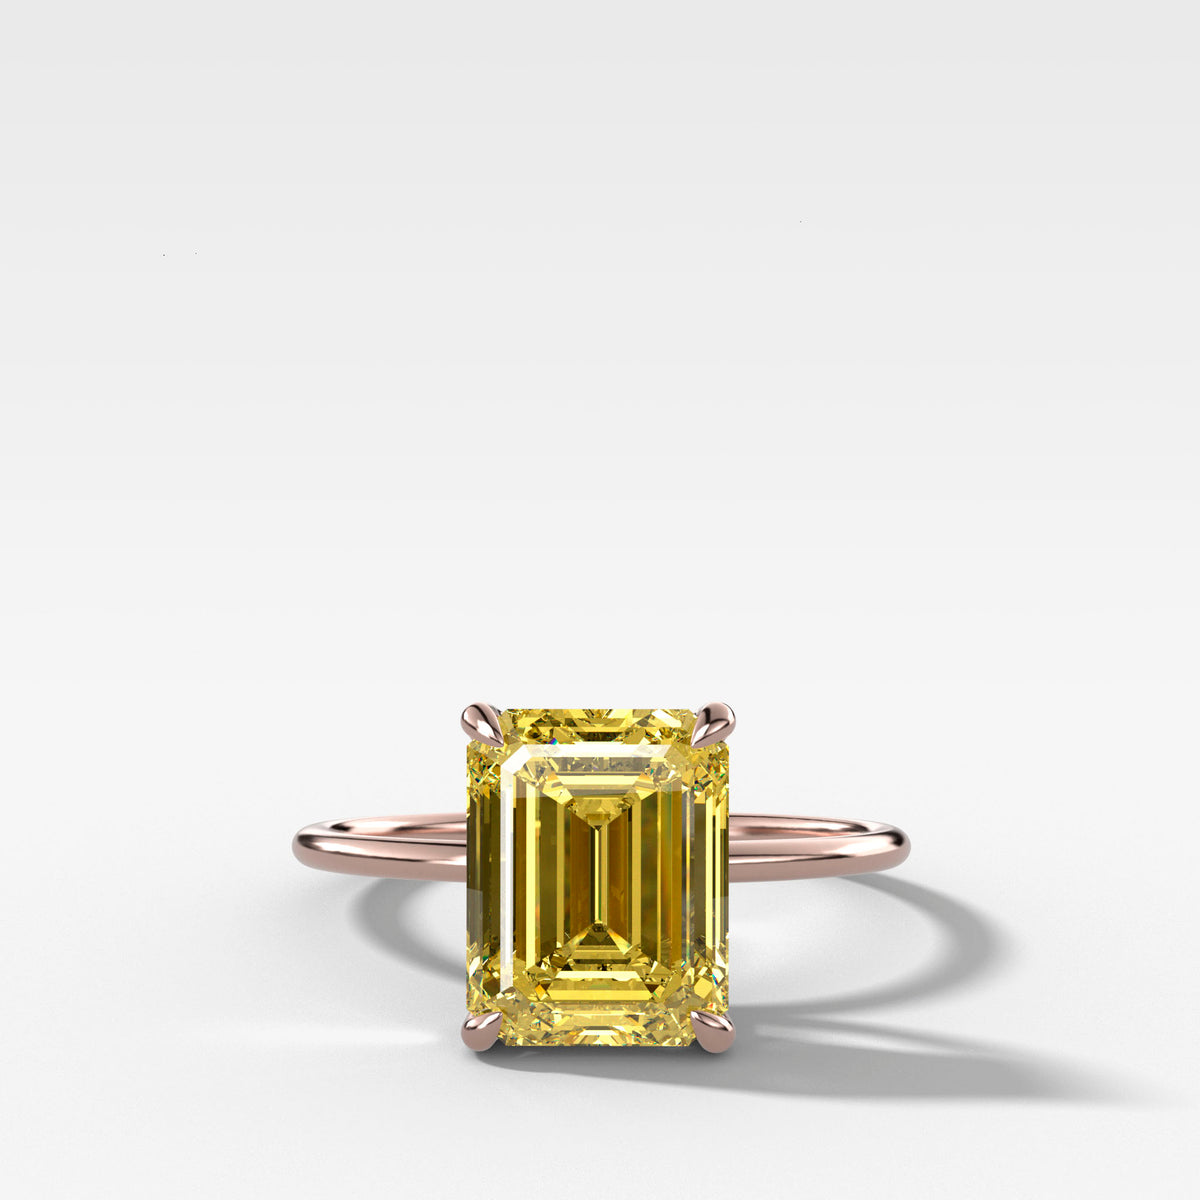 Thin + Simple Solitaire Engagement Ring With Canary Yellow North South Emerald Cut Diamond